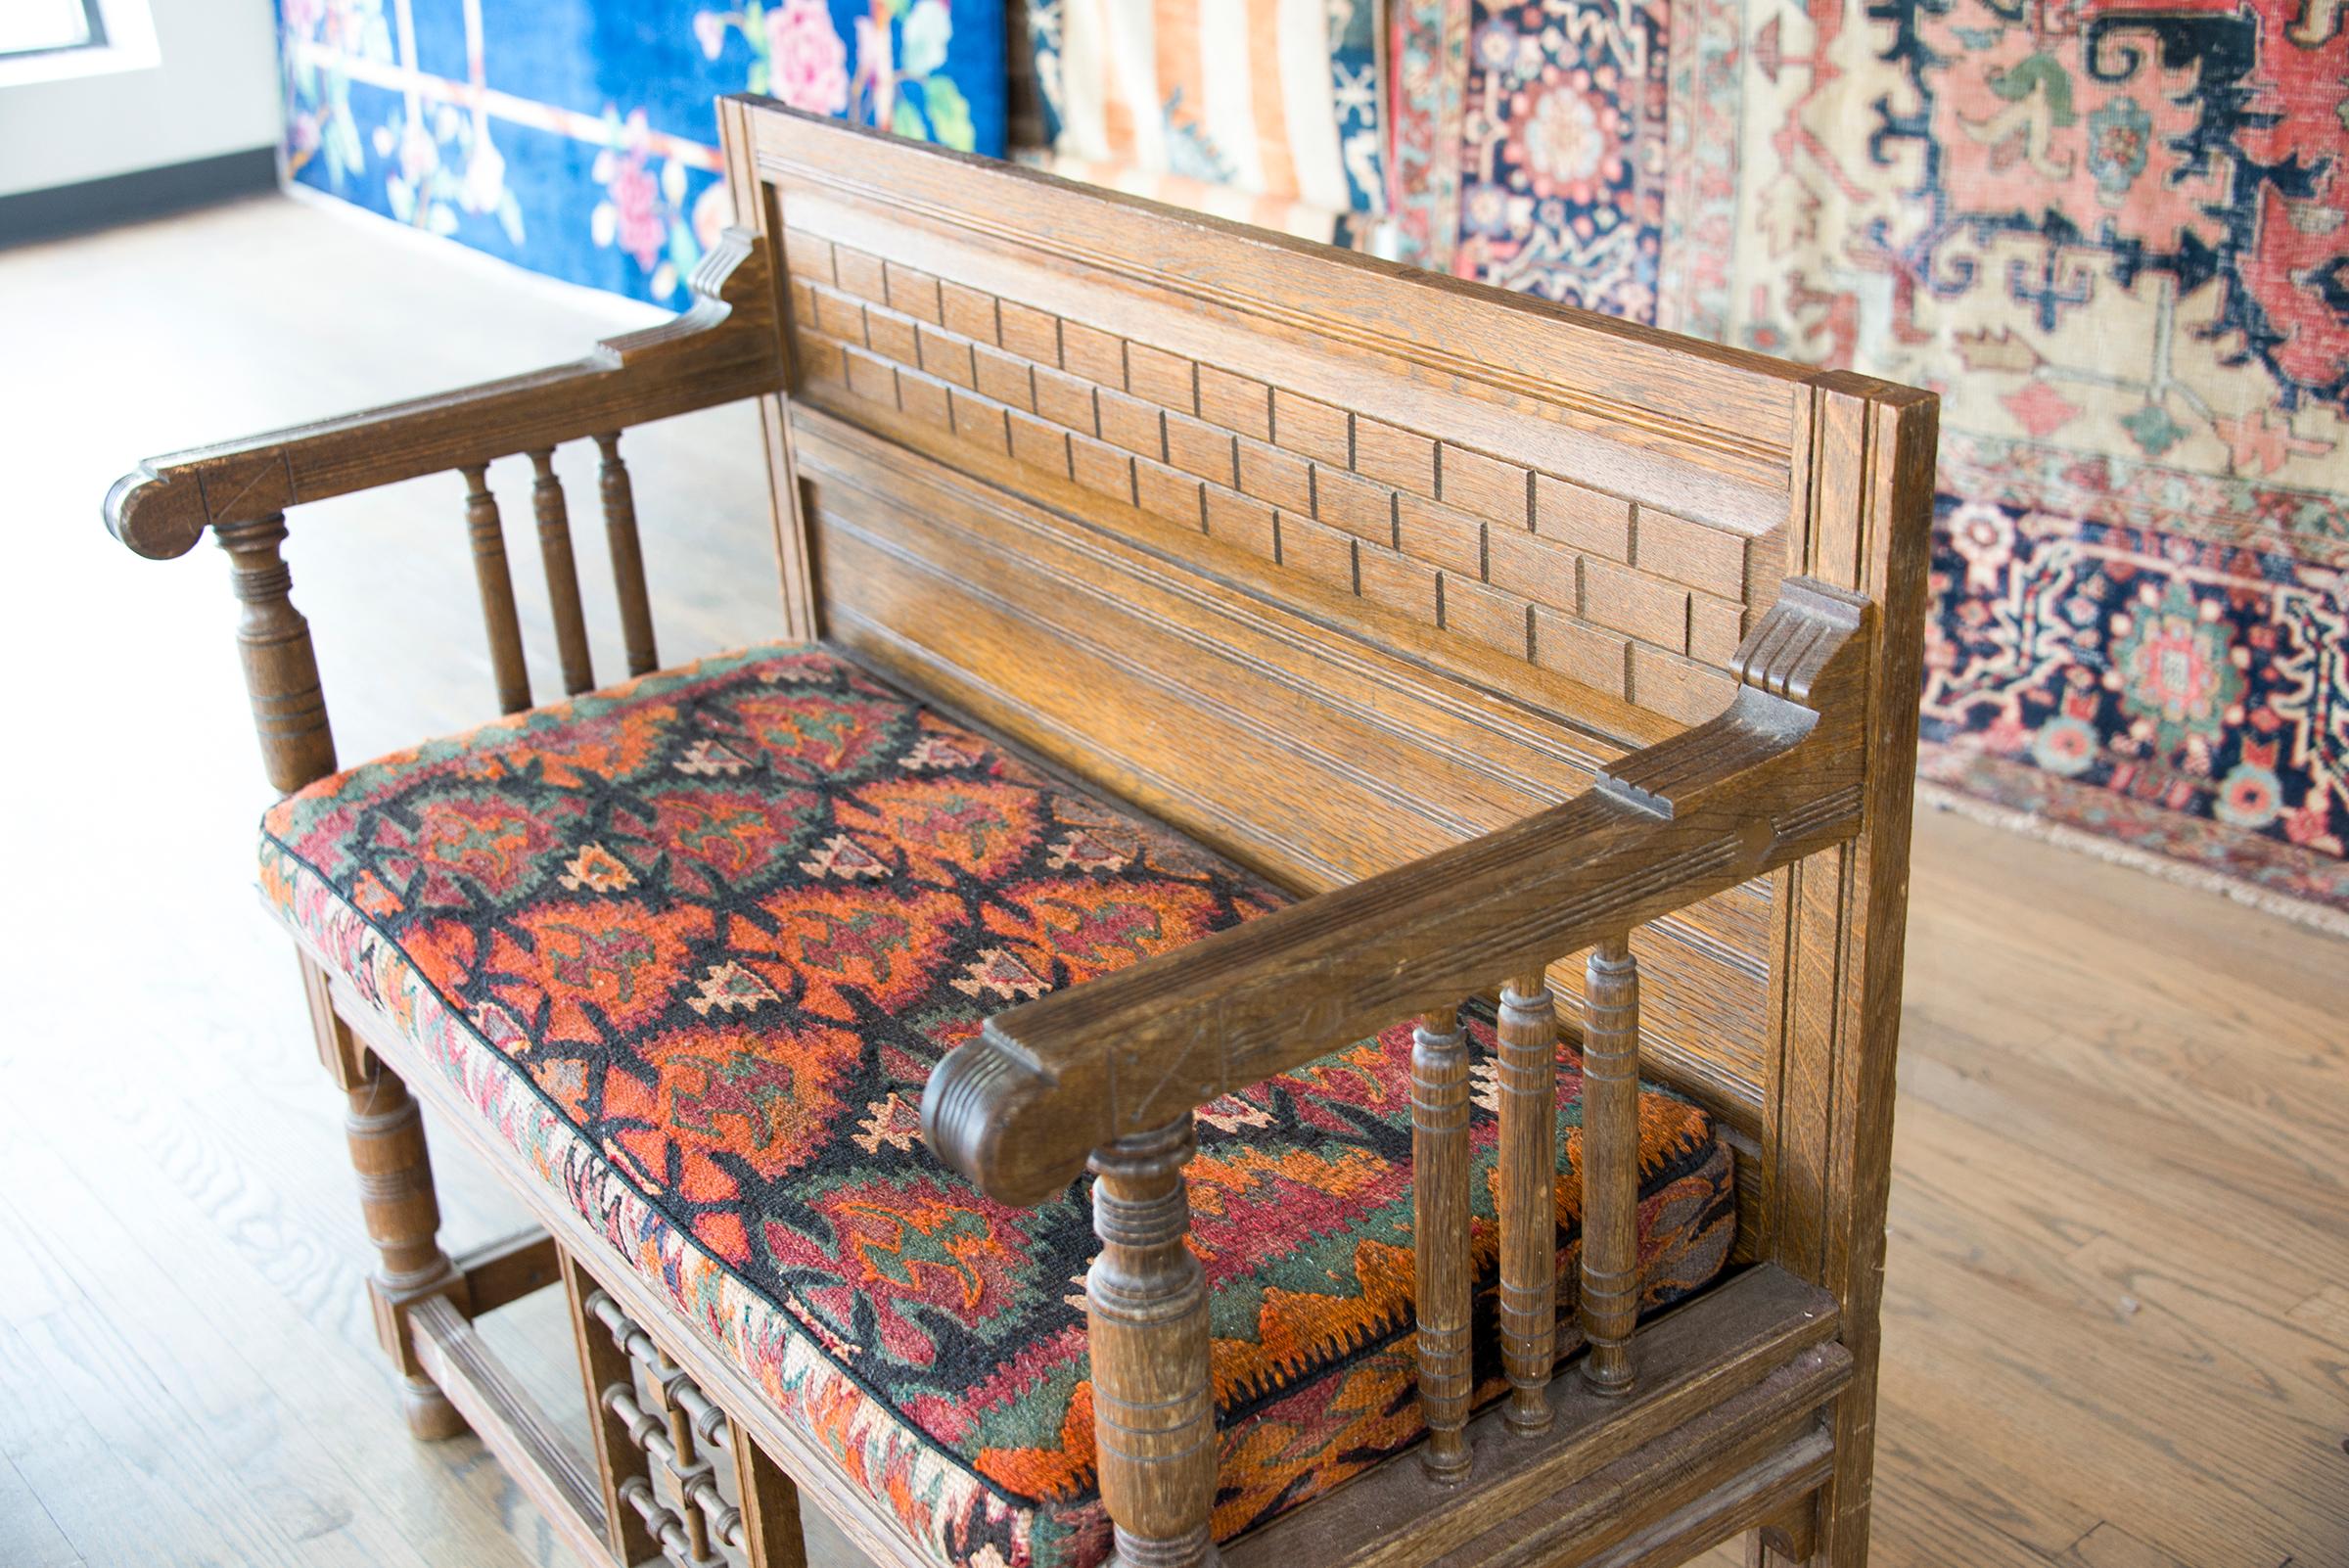 Early 20th Century Danish Bench with Kilim Upholstered Cushion  In Good Condition For Sale In Chicago, IL